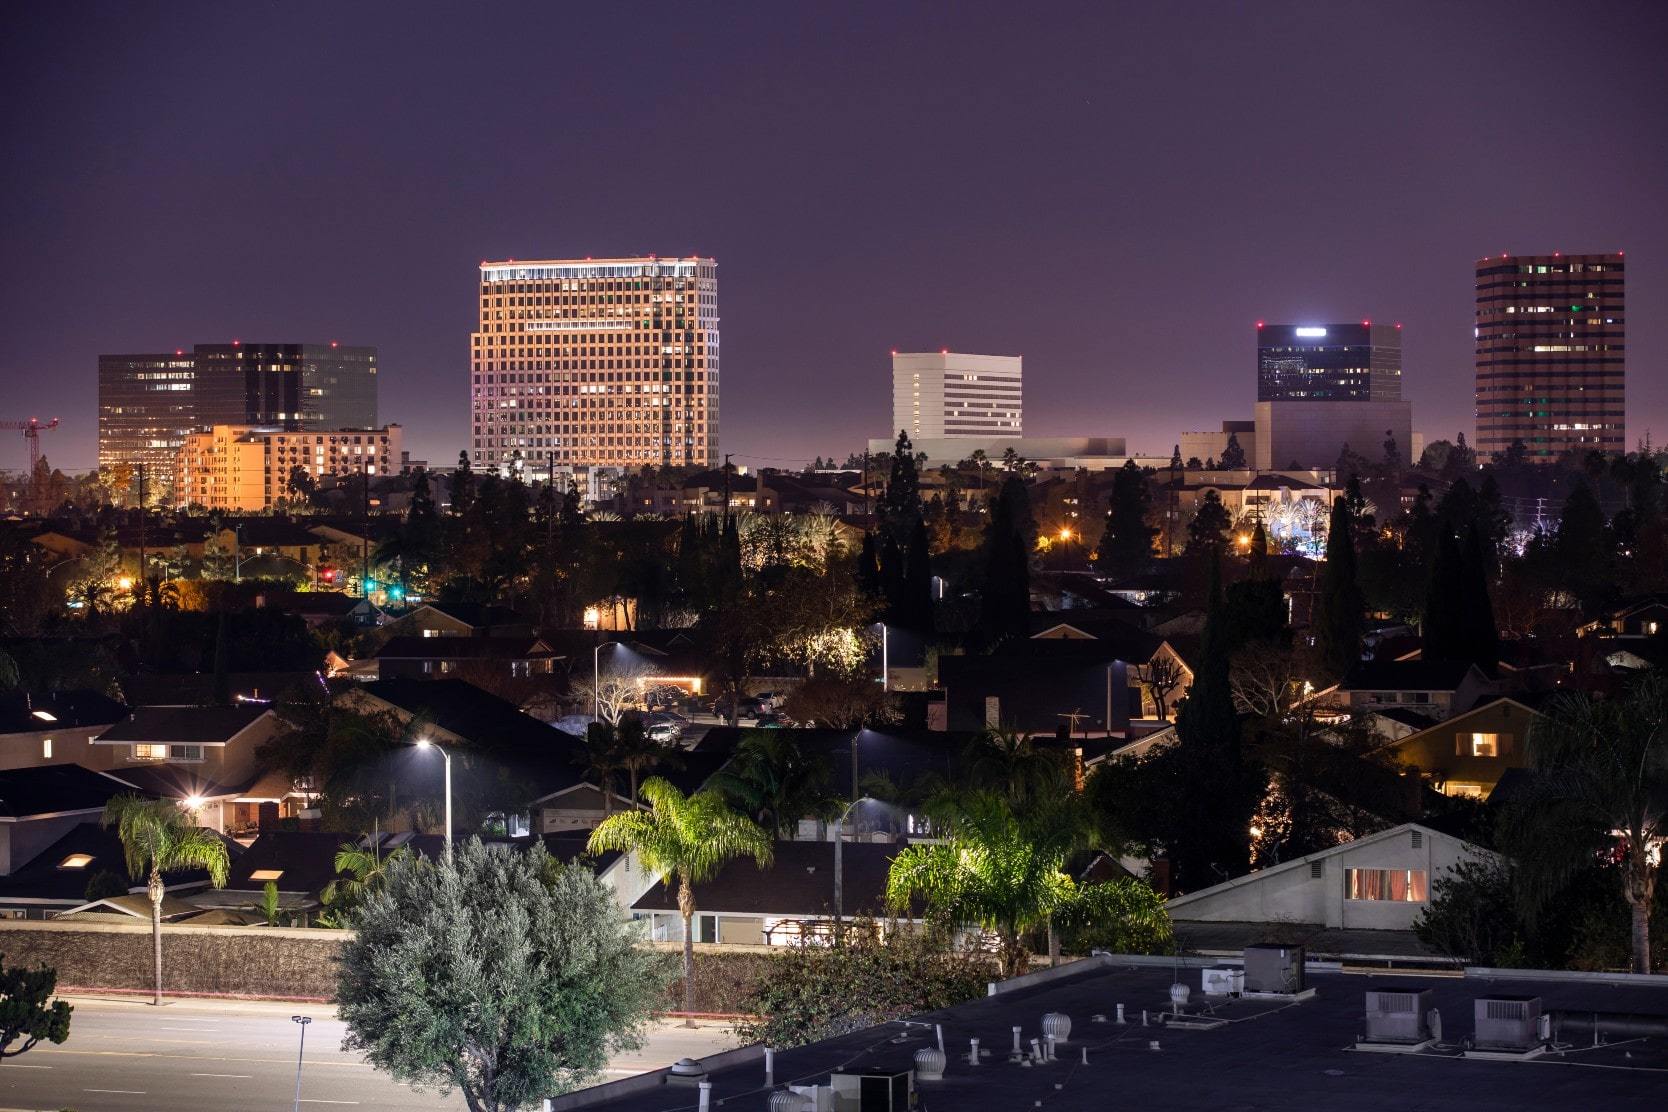 View of the skyline and prime real estate in Costa Mesa, California at night.